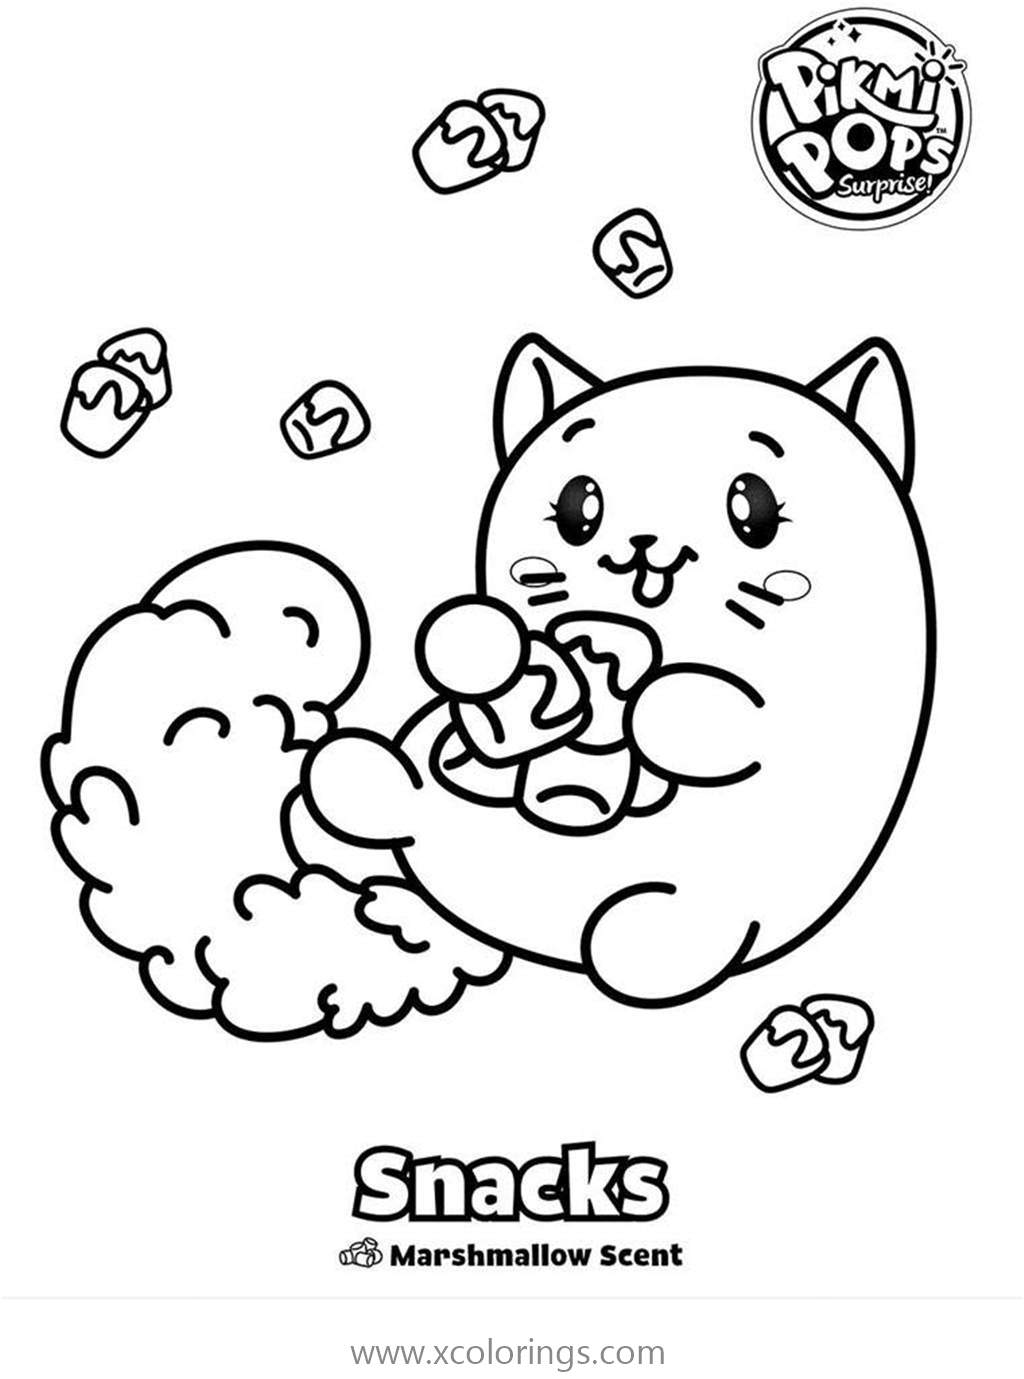 Free Pikmi Pops Snacks Coloring Pages printable